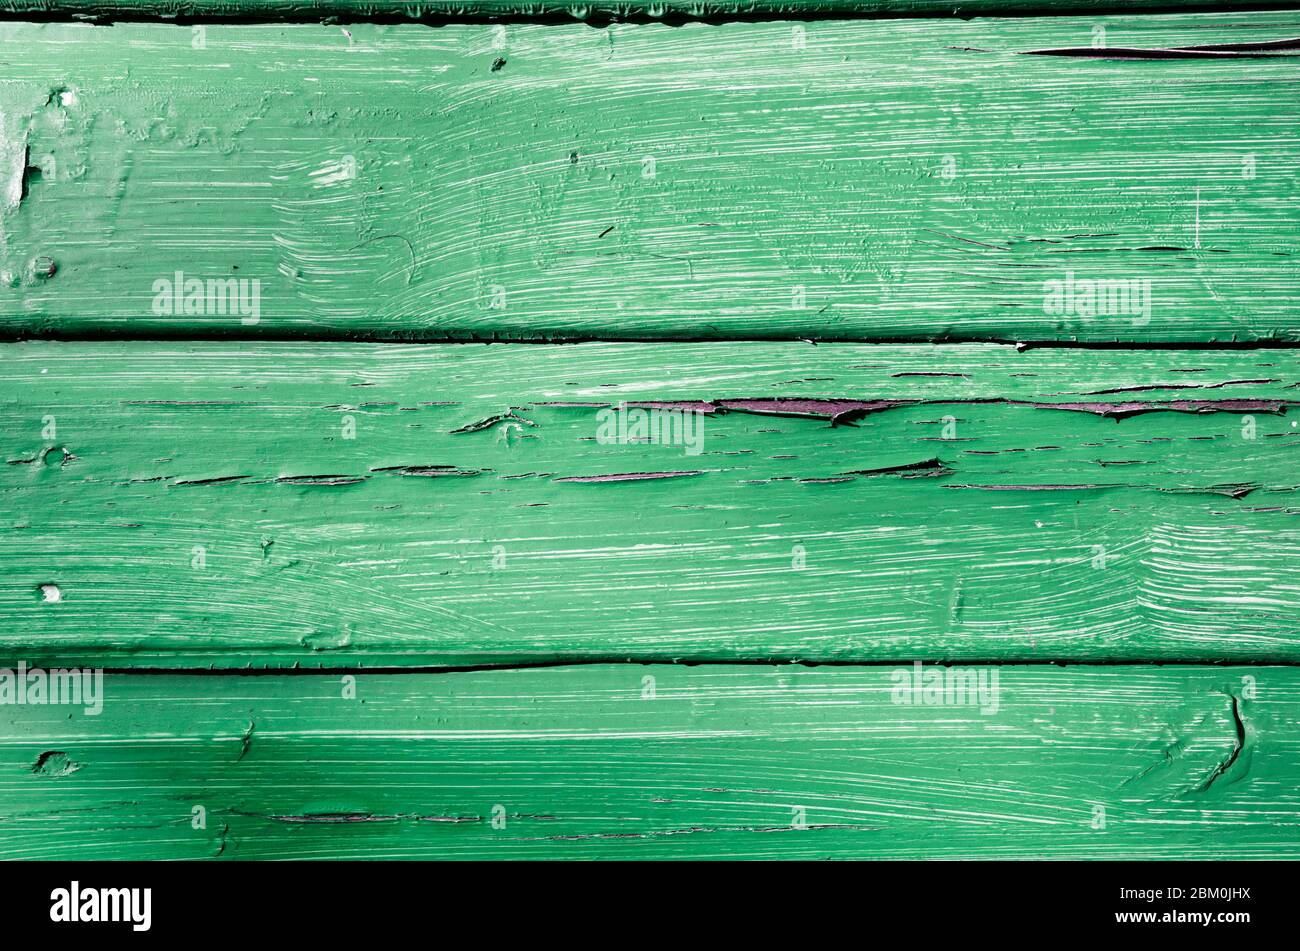 Close up of peeling paint against green faded rotting wooden panels Stock Photo